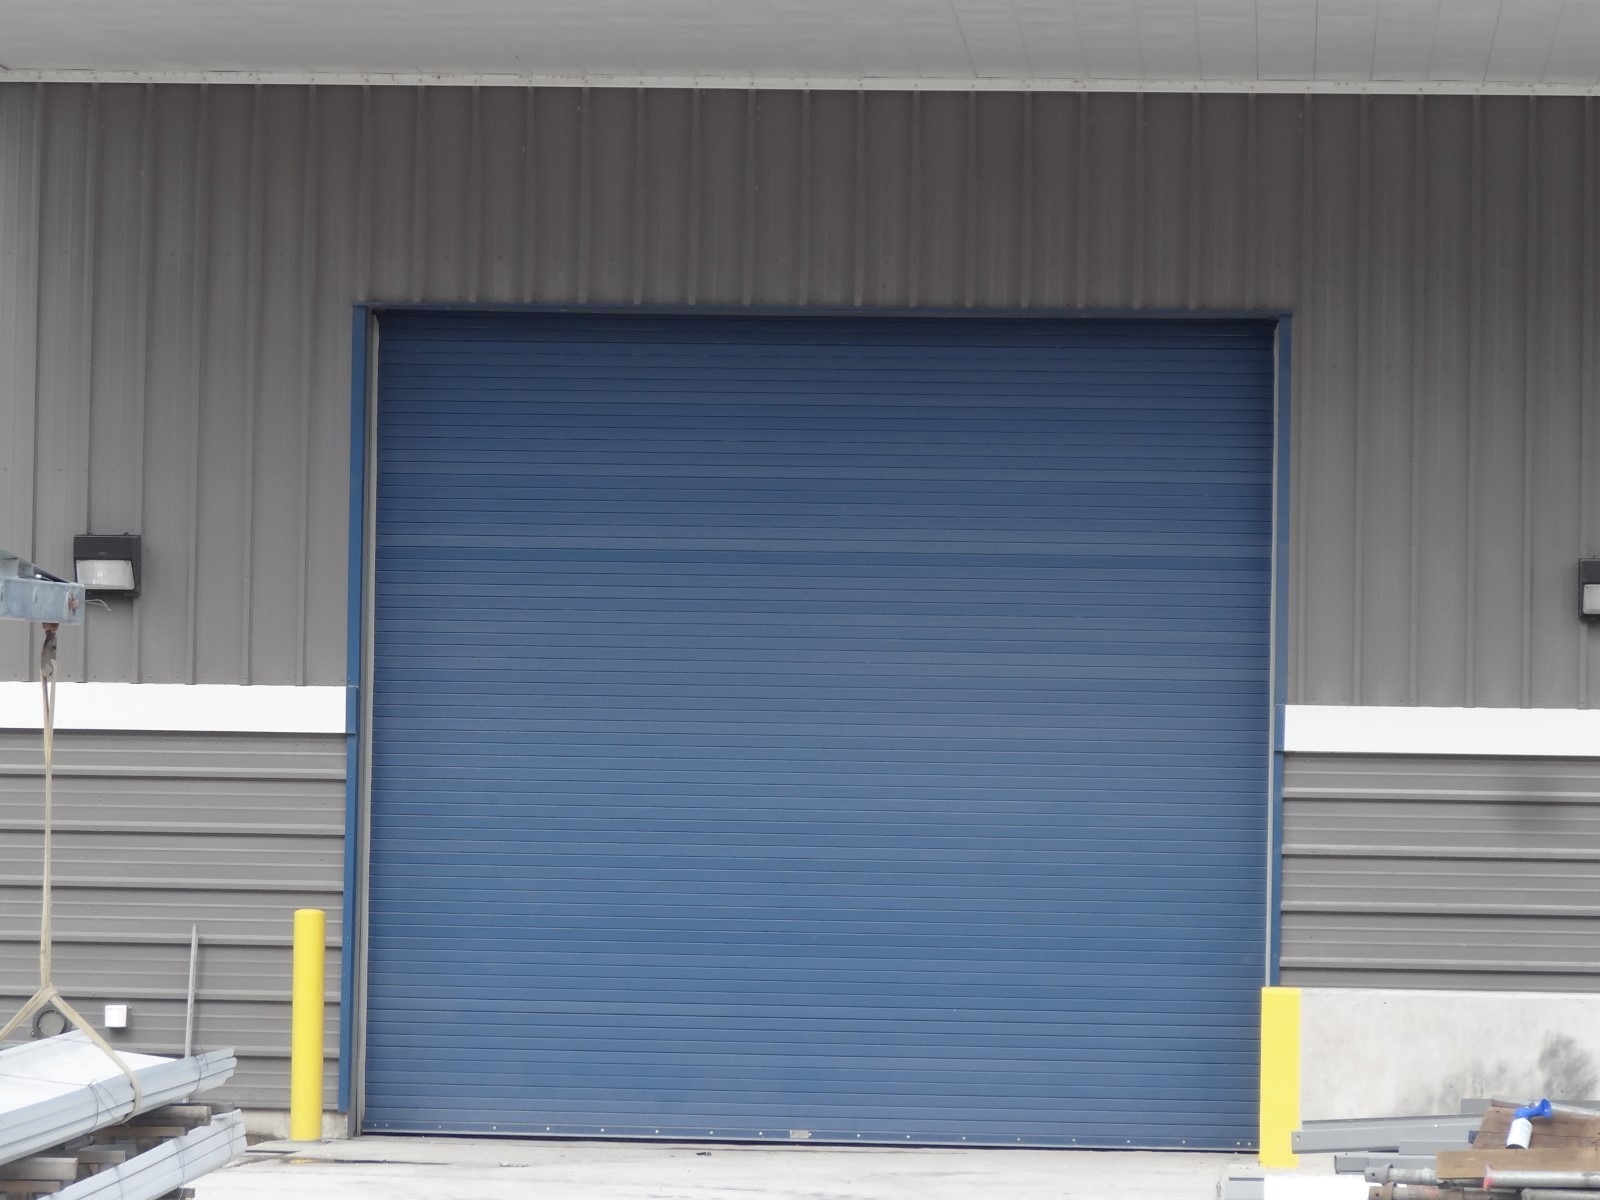 This Counter Rolling Door is certified as a 3hr Fire Rated door that at the same time provides the benefits of a thermal control door with a 7.25 R-Value. It provides up to 3hr protection with a safety, practical and reliable operation with a great appearance; it is certify under the UL10B protocol and can be order to meet and exceed the very stringent High Velocity Hurricane Zones (H.V.H.Z) requirements of the current edition of the Florida Building Code and Miami Dade County Building Code.